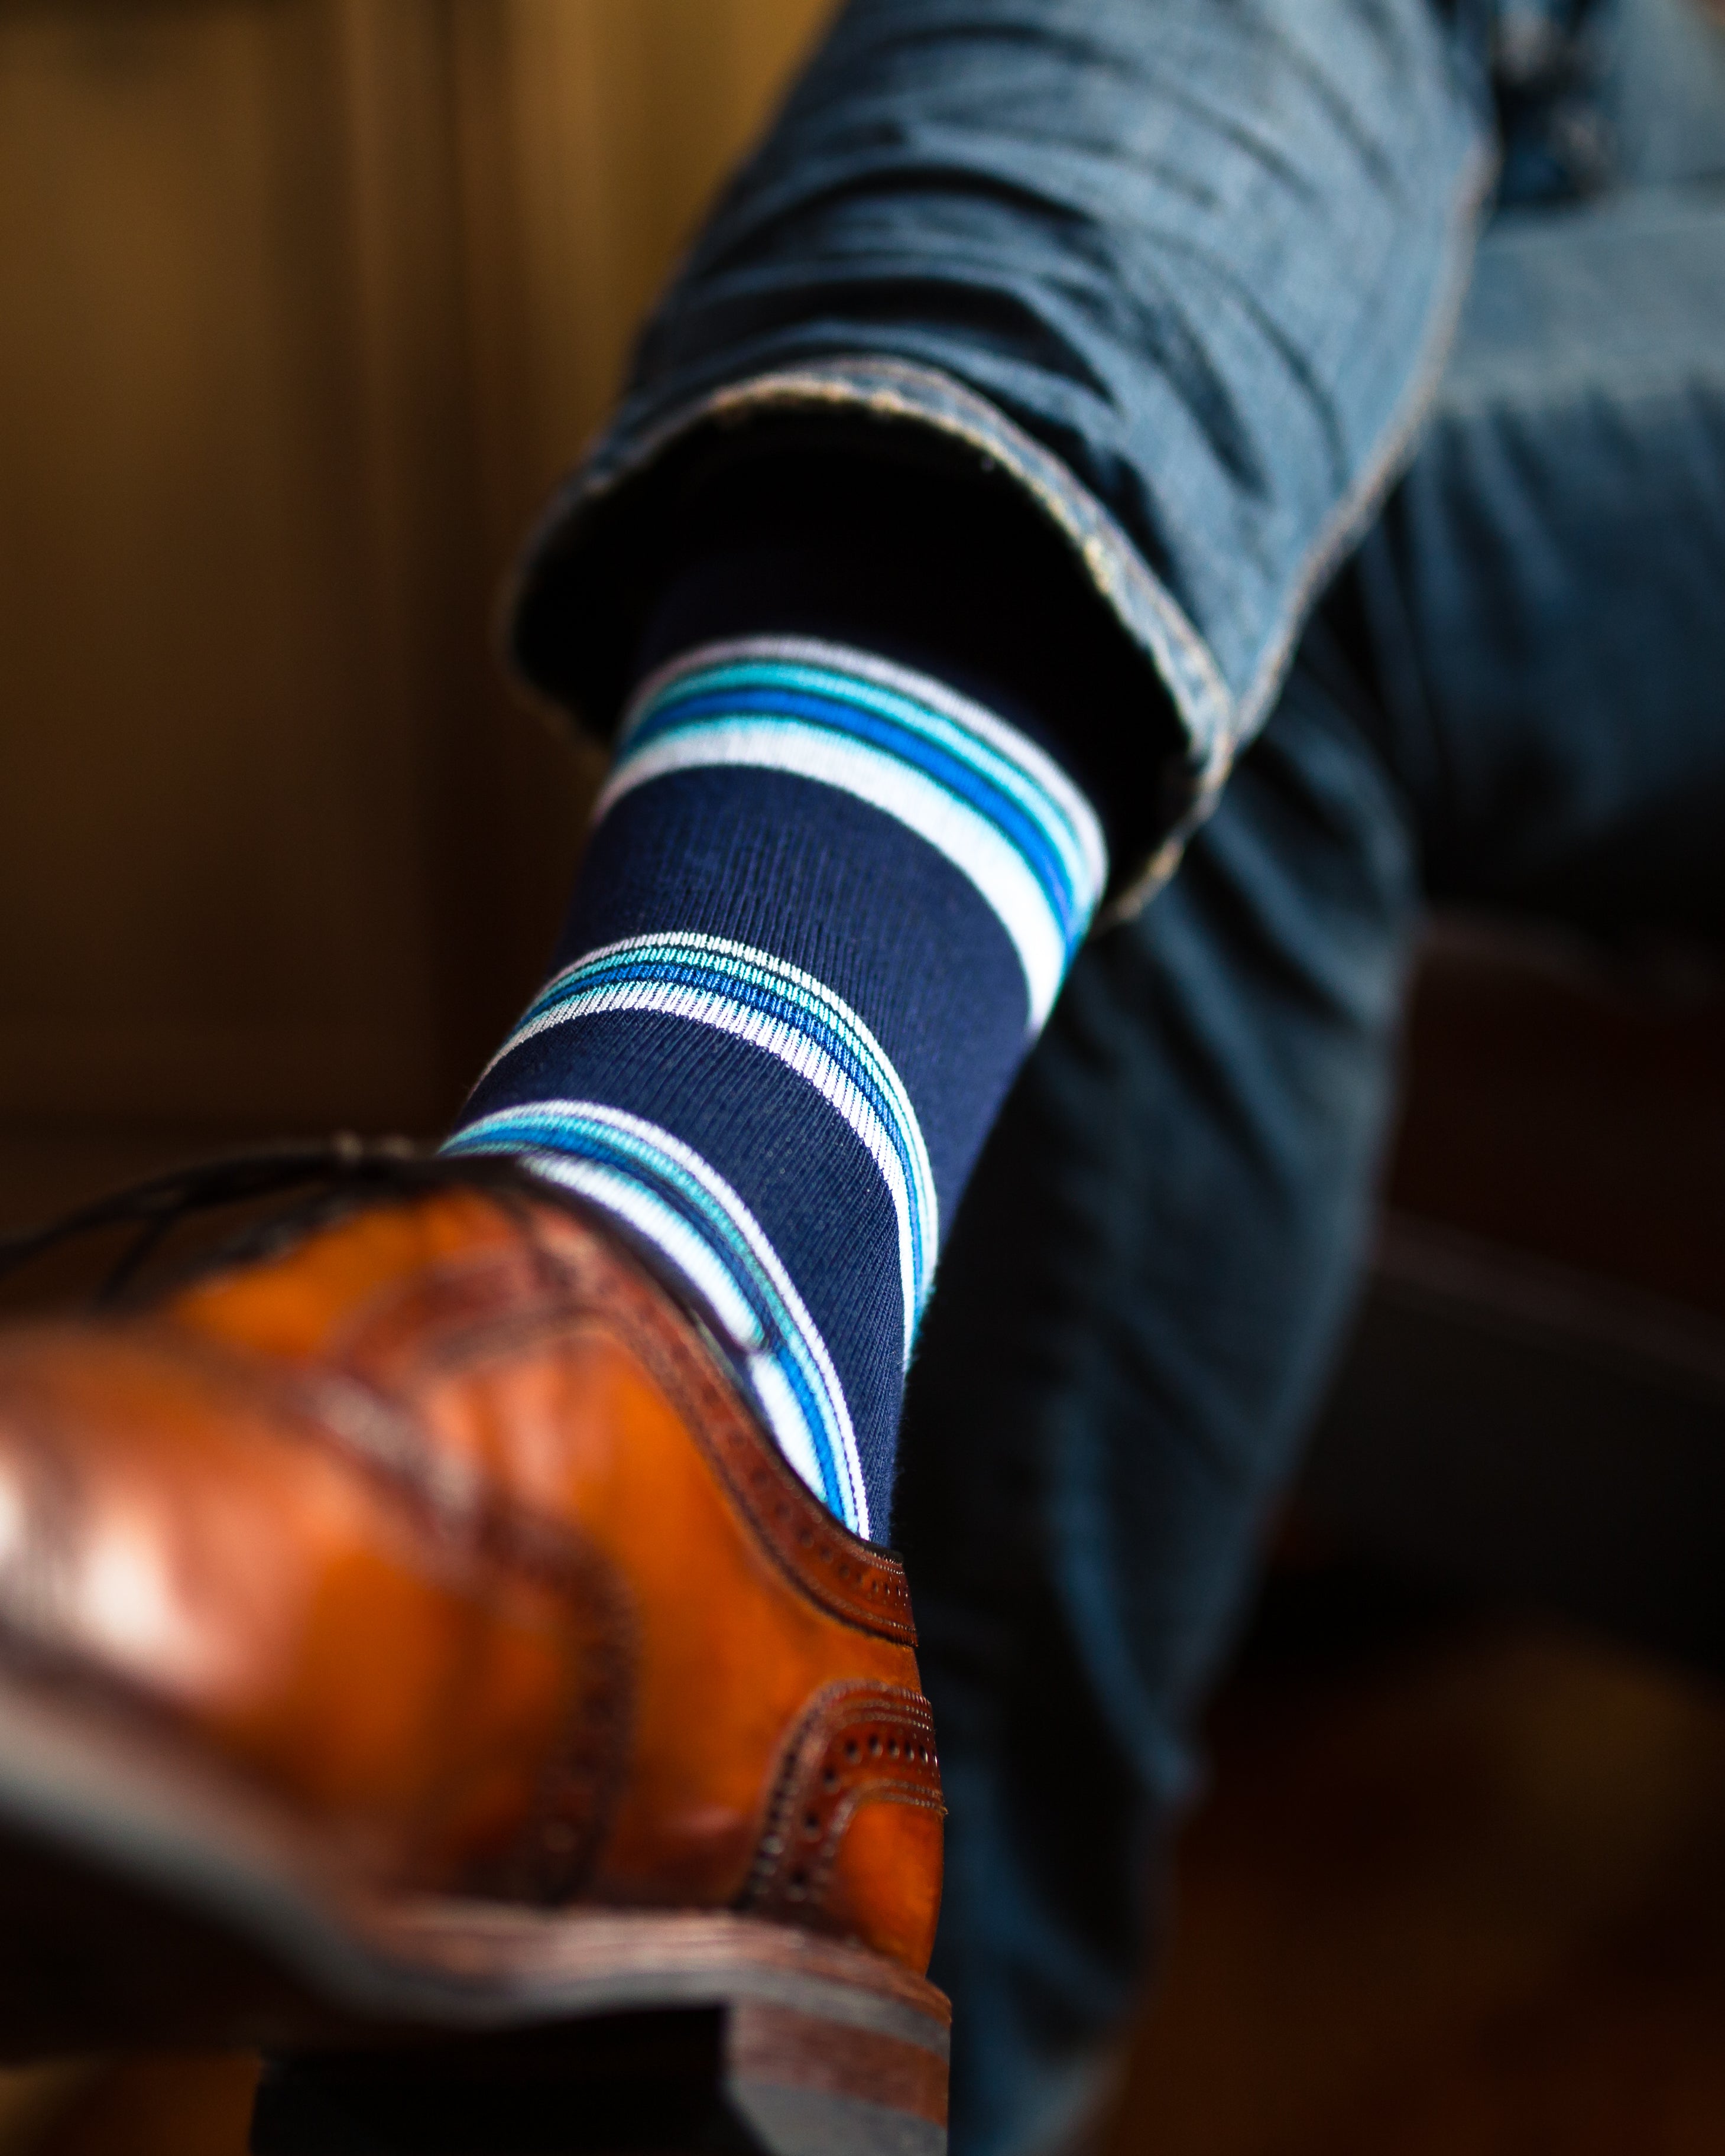 navy blue over the calf dress socks with blue light pink and light blue stripes, blue jeans, brown dress shoes